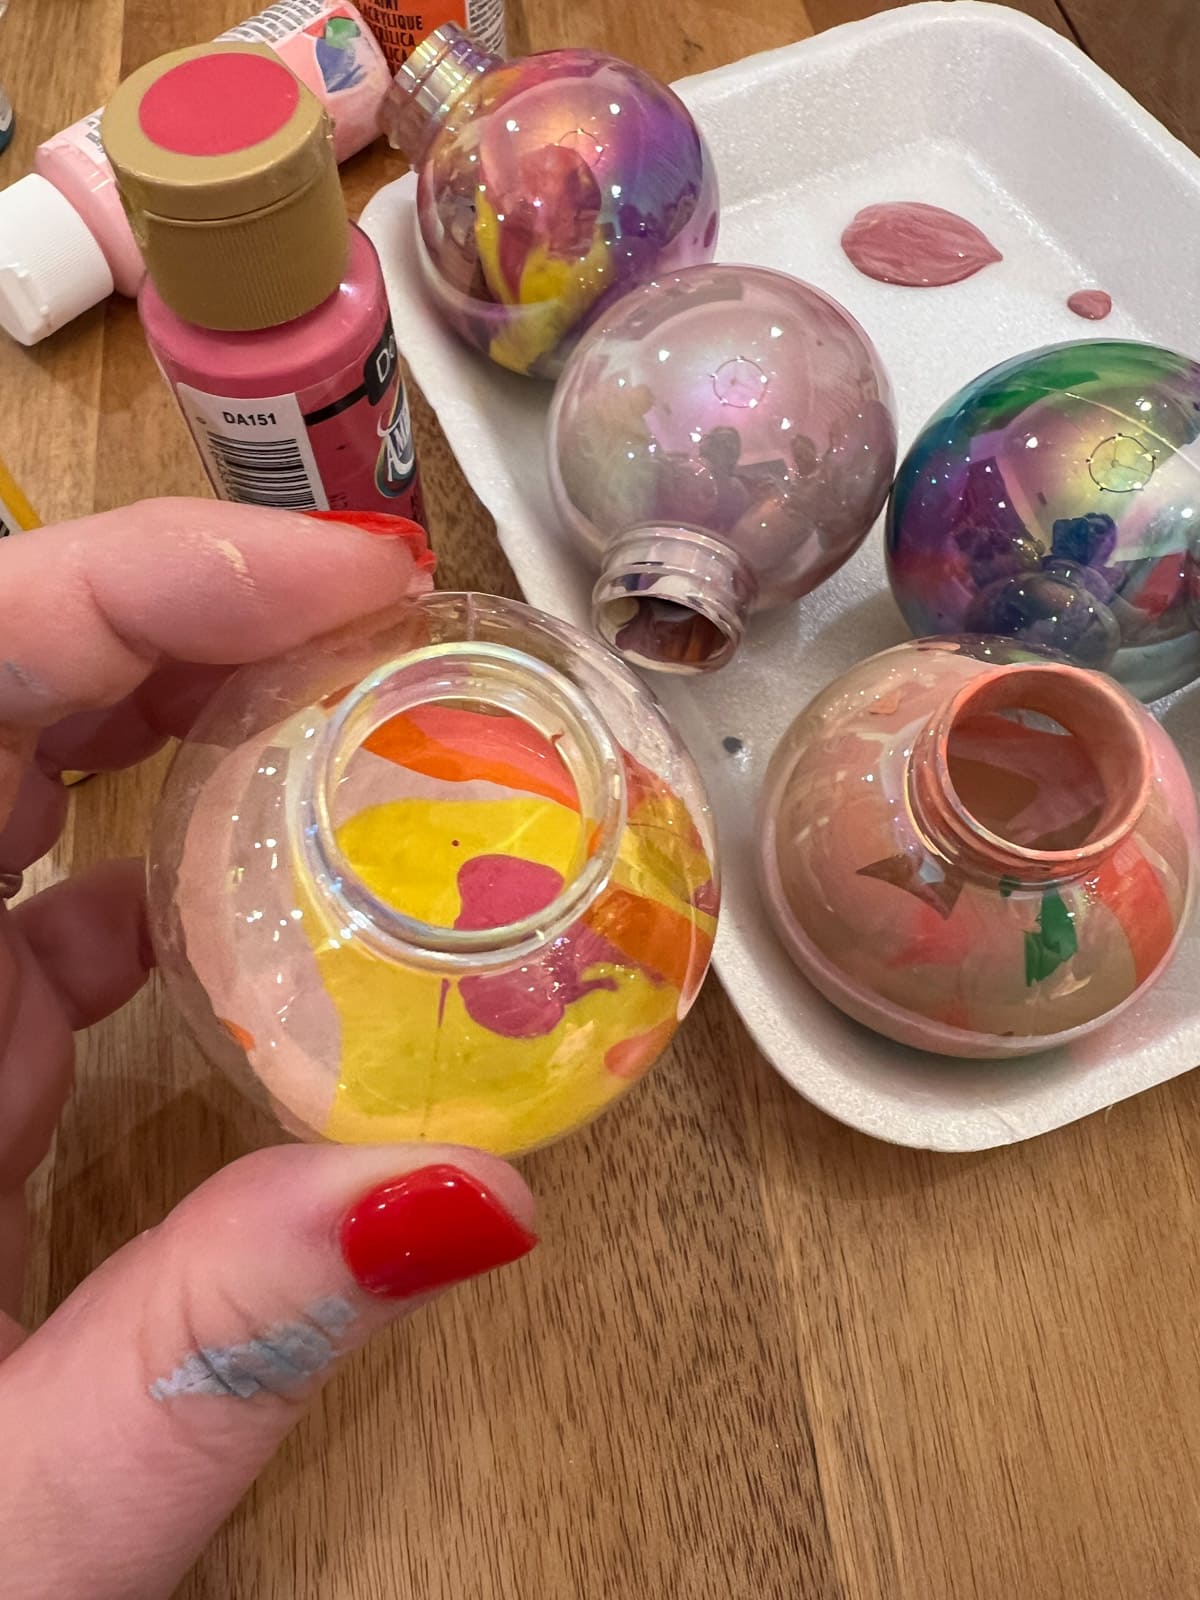 Showing how to make diy painted ornaments using clear ornaments and craft paints.